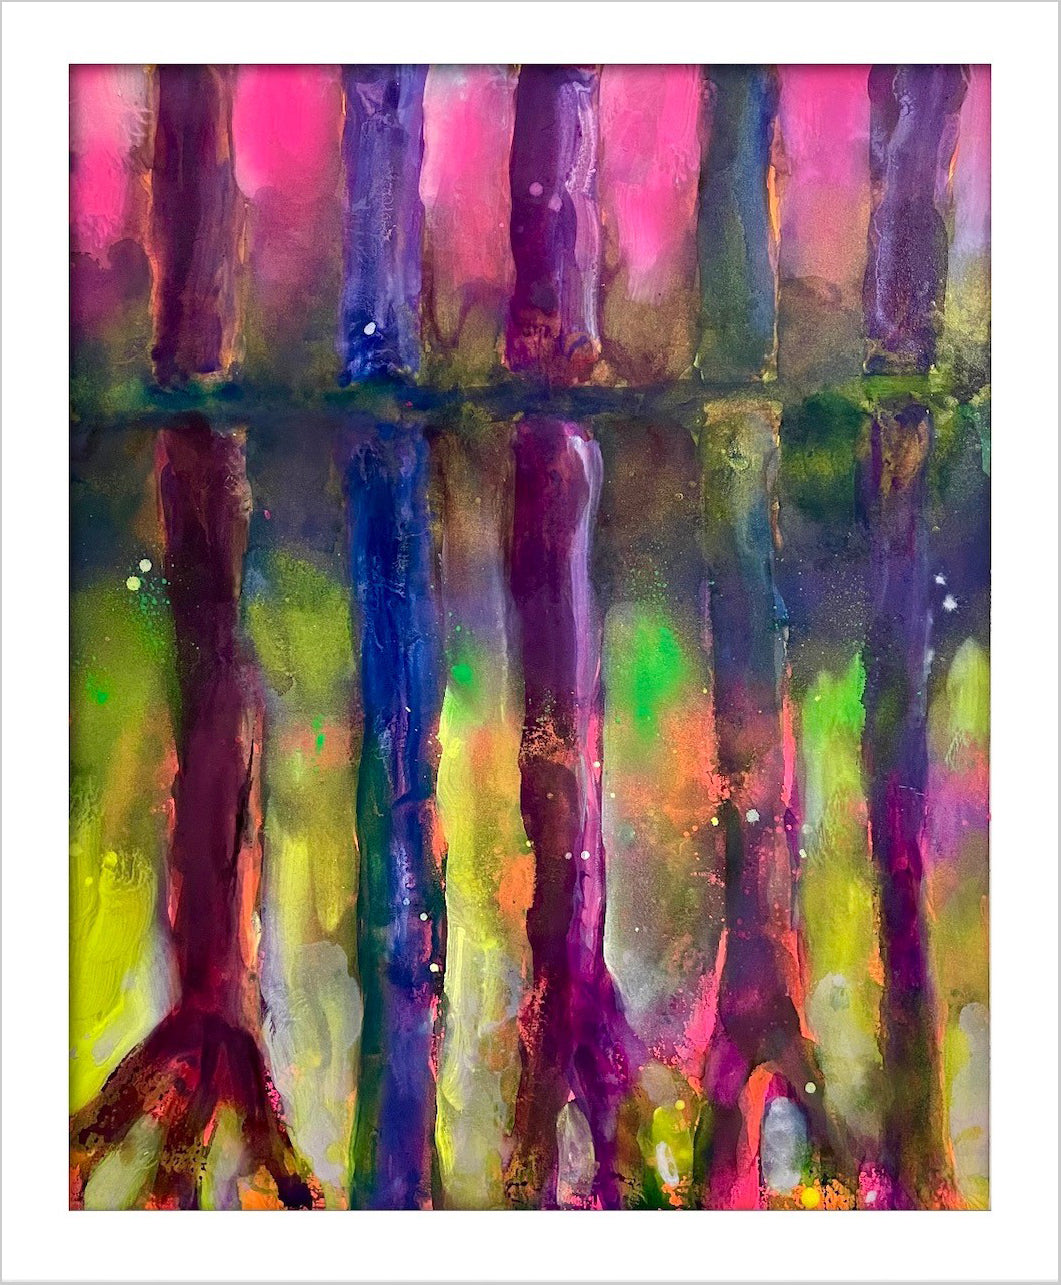 Simon Keenleyside 'Woods (green, purple & pink)', 2021 Watercolour, spray paint, ink on Fabriano Artistico paper 640gsm 47x38cm